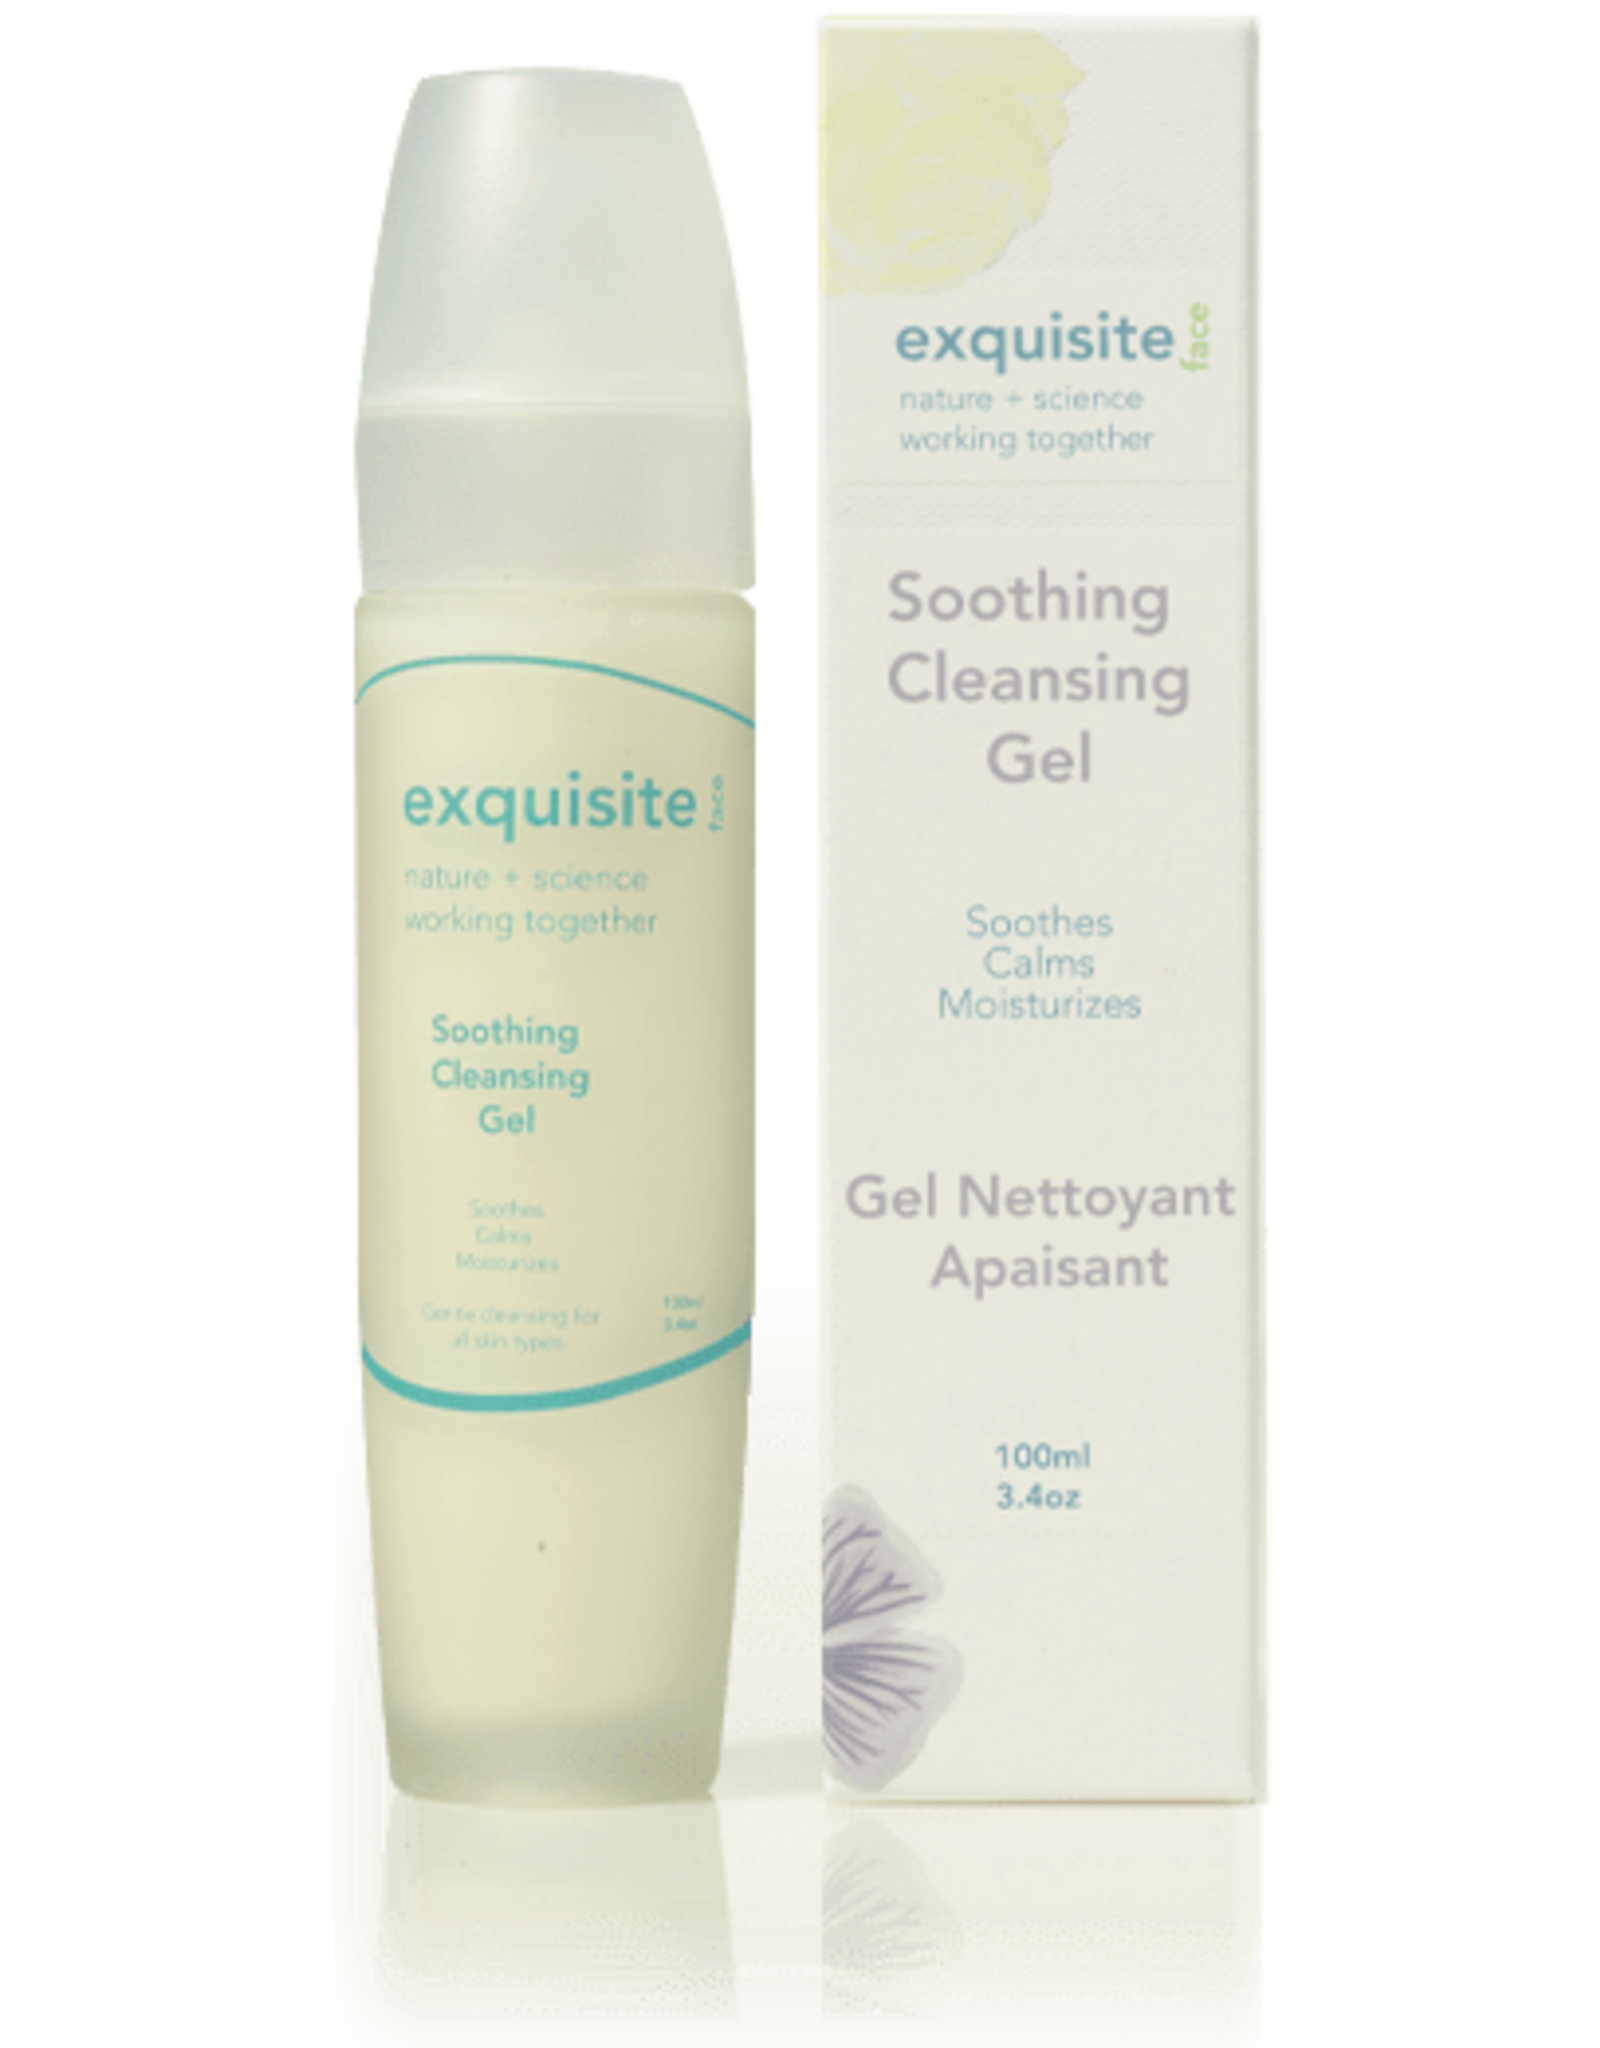 Exquisite Face and Body Soothing Cleansing Gel, 100ml